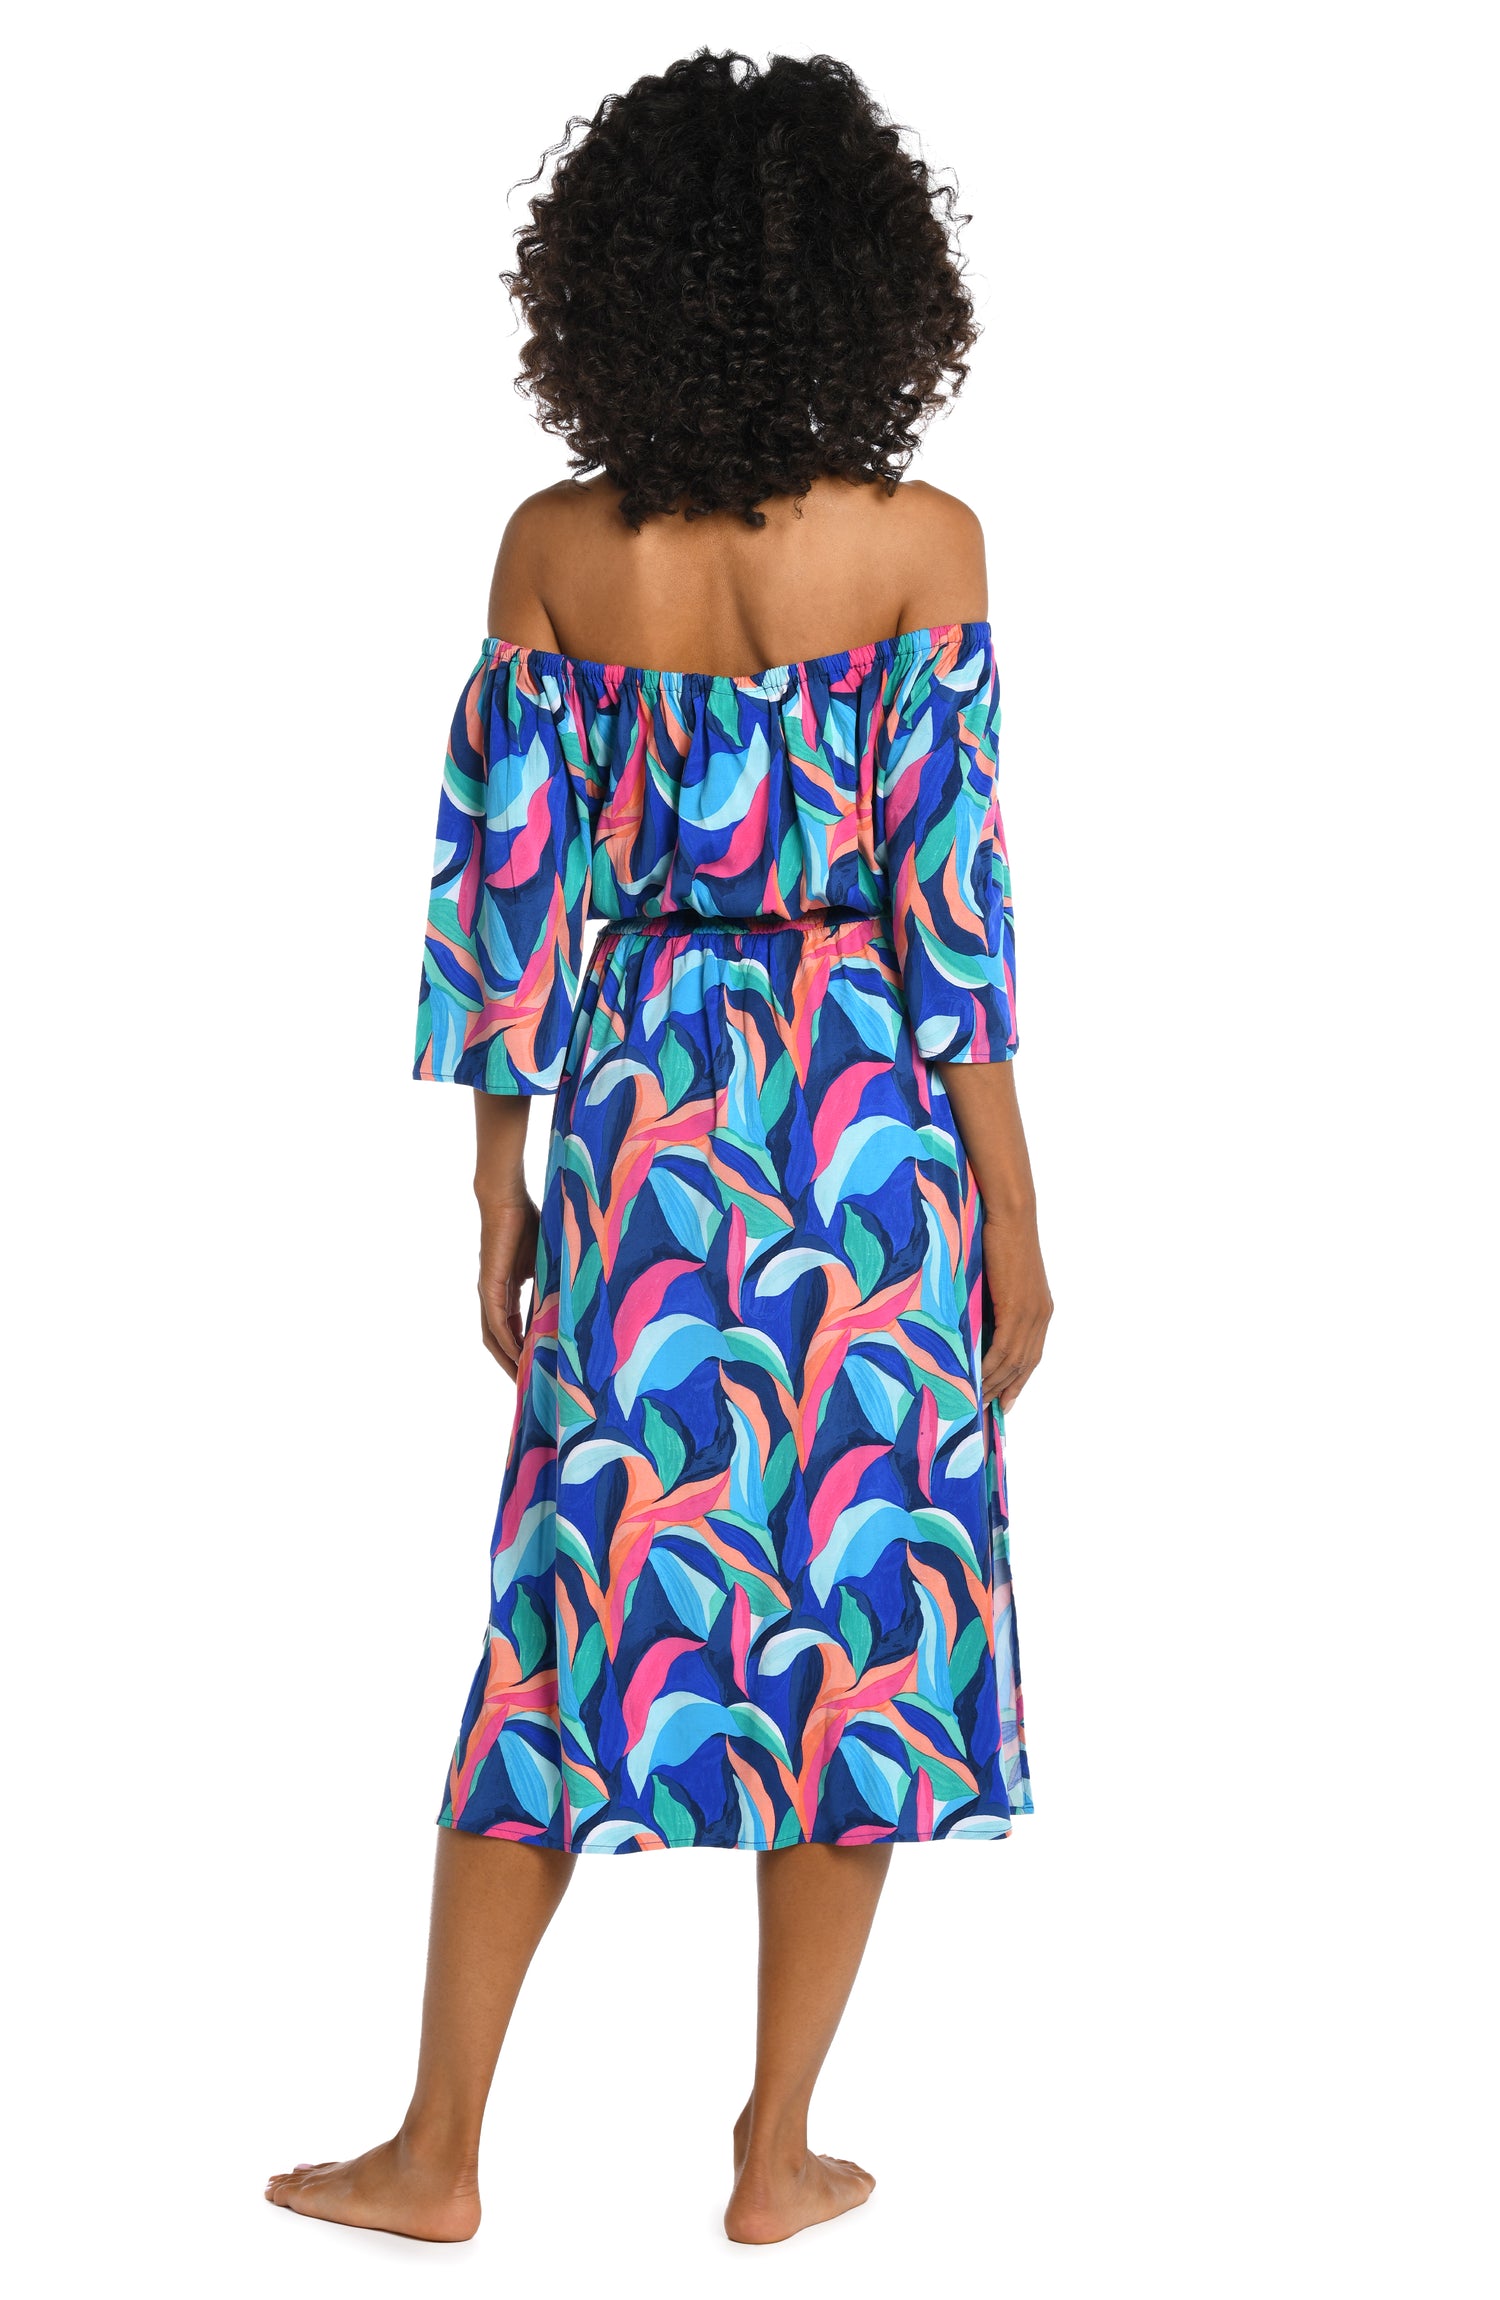 Model is wearing a bold paint-like stroke of vibrant dark colors printed on this off shoulder cover up dress from our Painted Leaves collection!